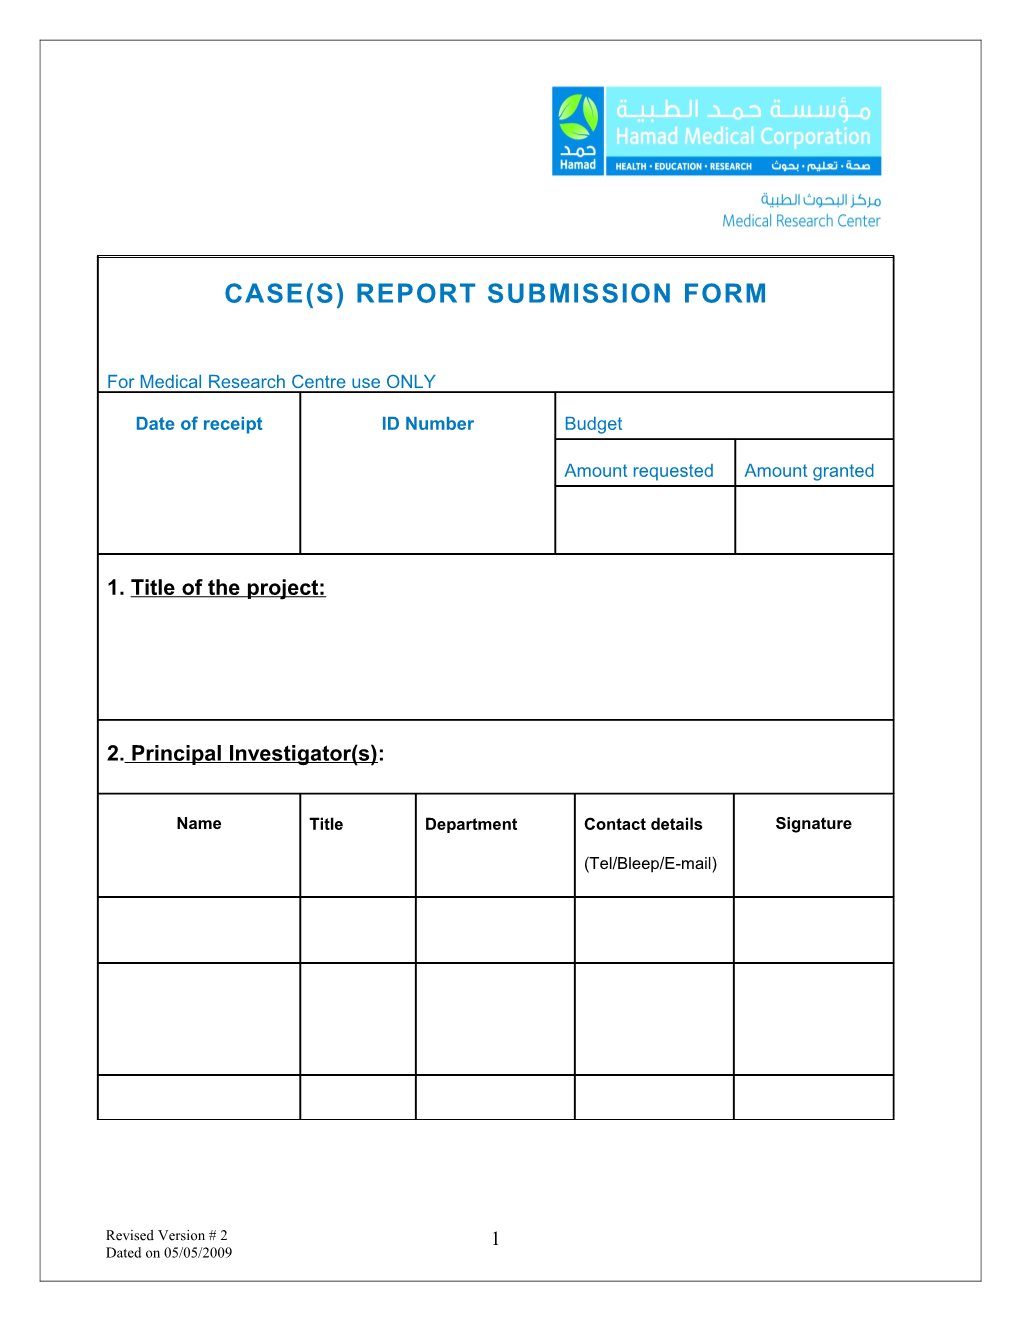 Case(S) Report Submission Form